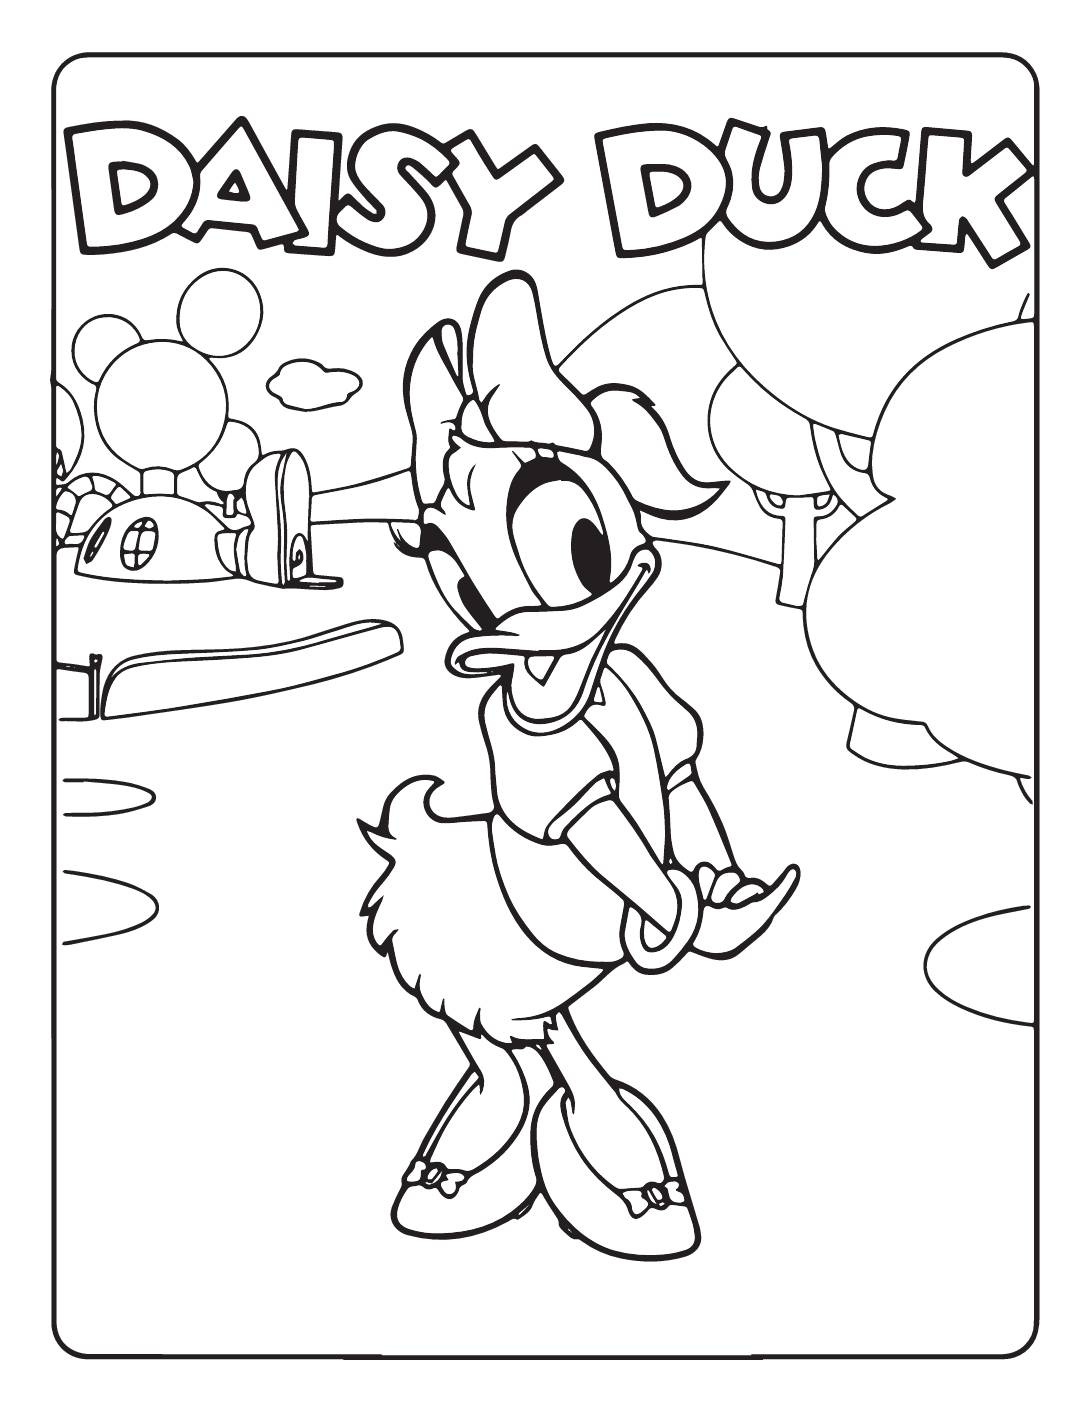 Daisy Duck Coloring Page